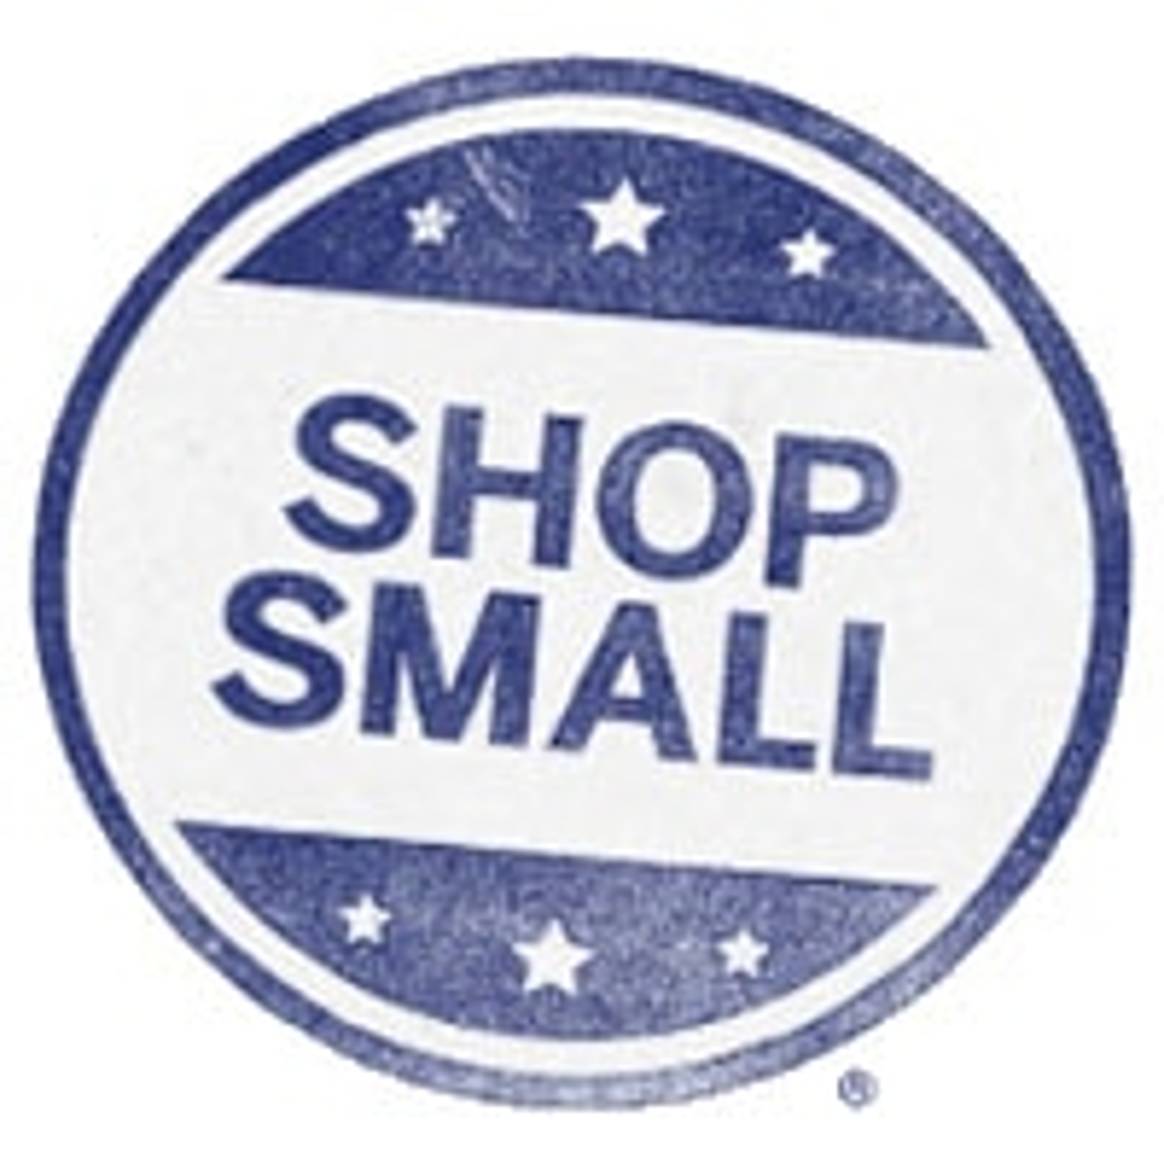 Small Business Saturday supports small retailers